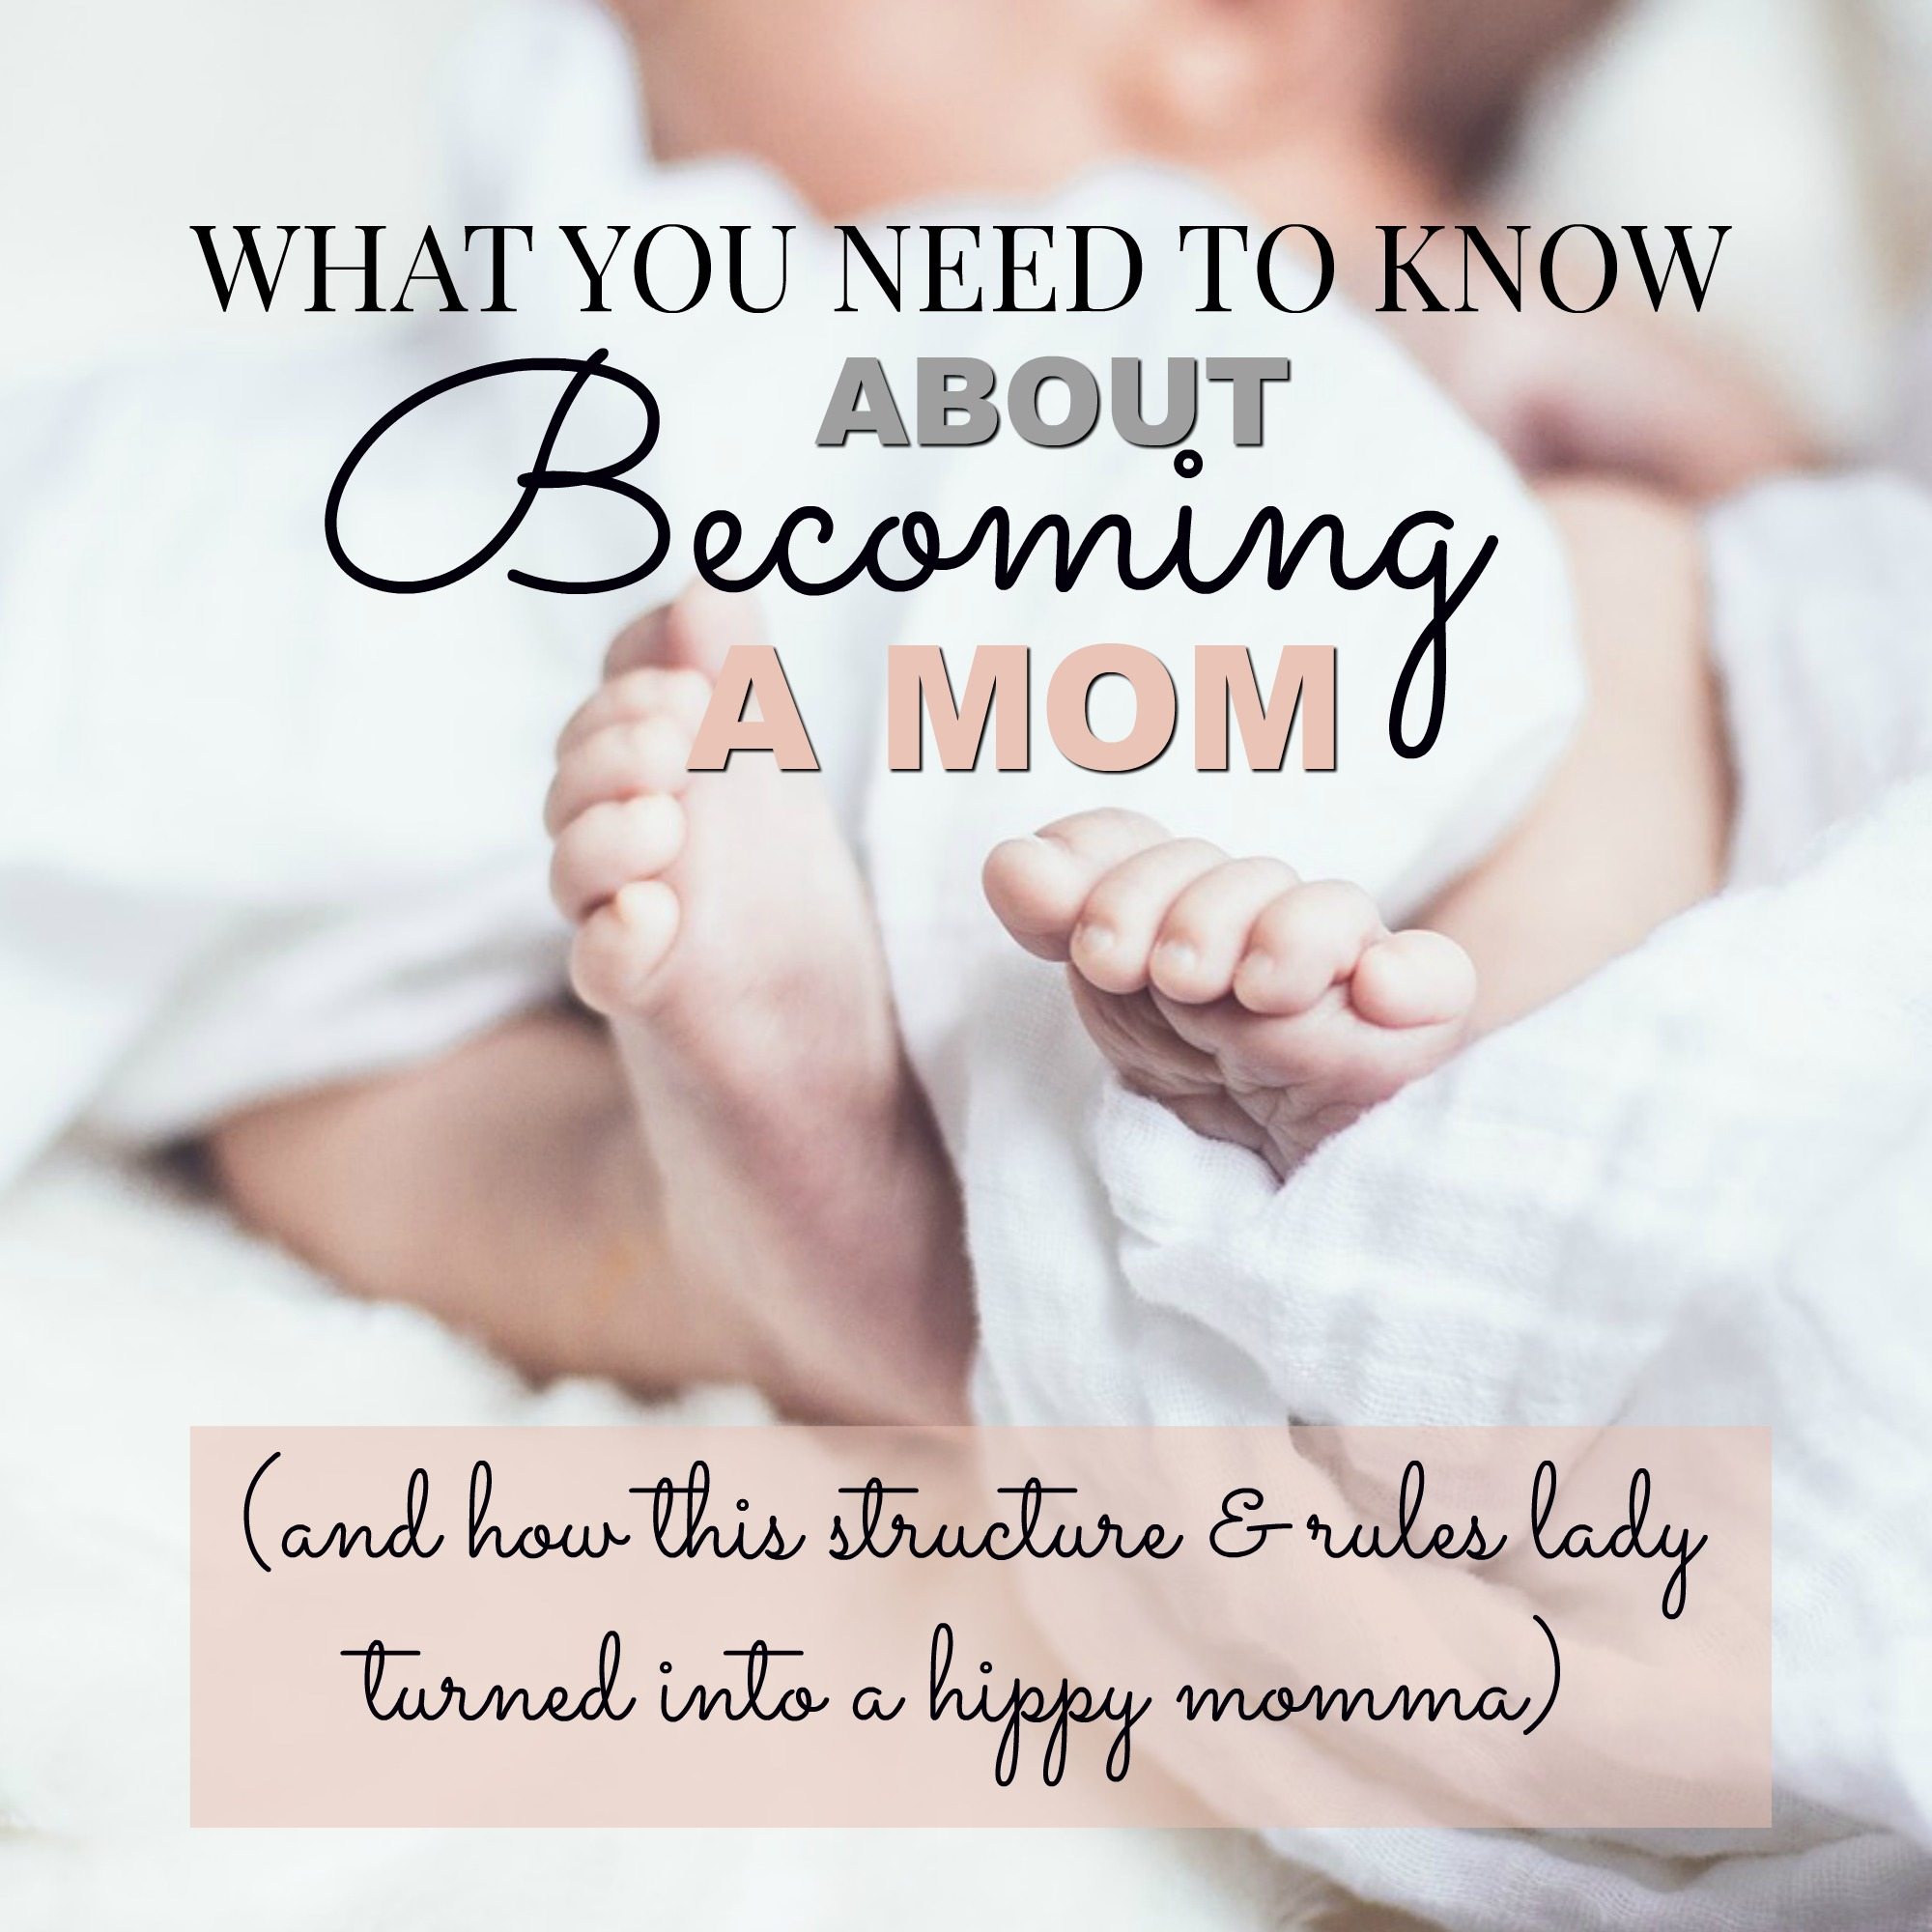 What you need to know about becoming a Mom